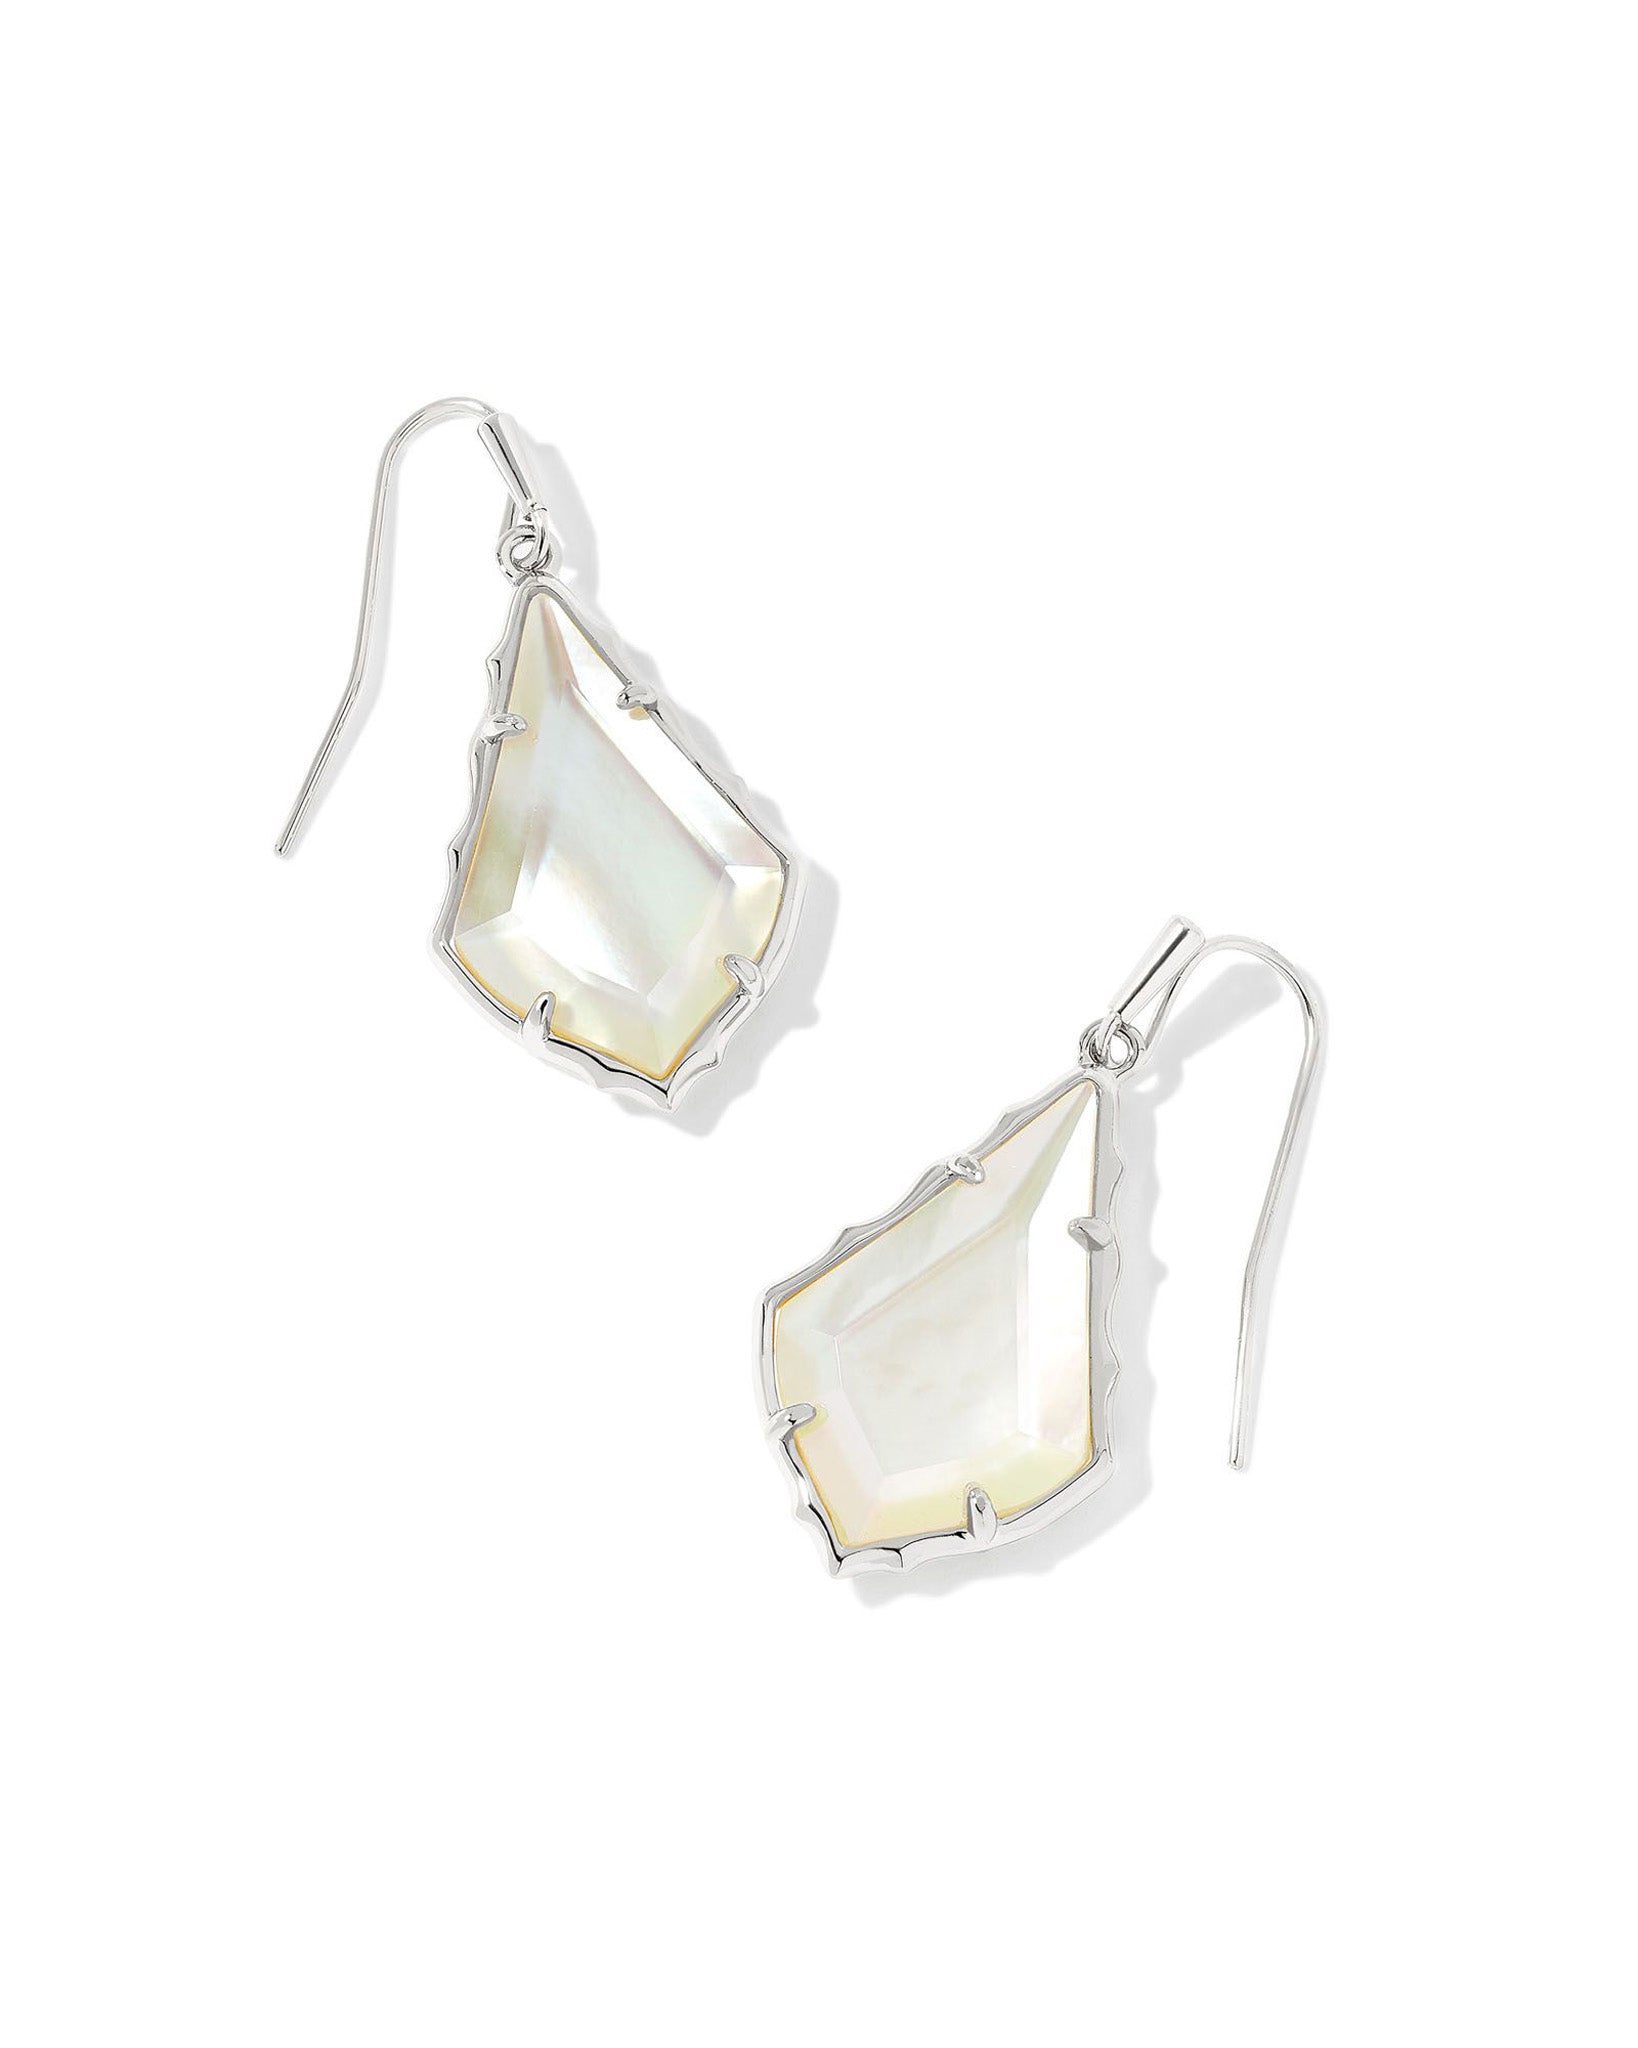 Kendra Scott Small Alex Dangle Earrings in Faceted Ivory Illusion and Rhodium